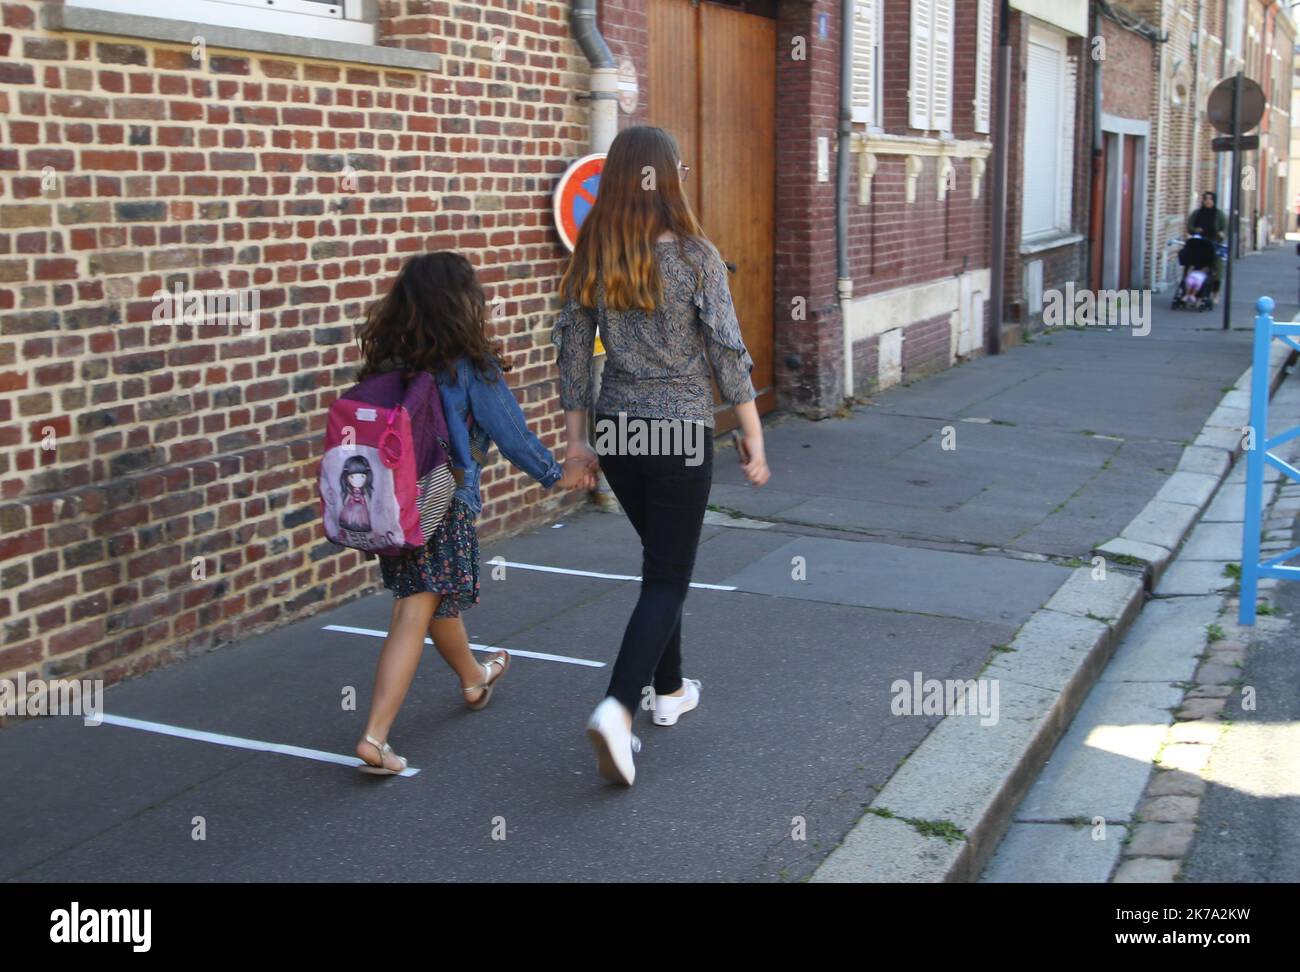 /LE COURRIER PICARD/Fred HASLIN ; Amiens ; 22/06/2020 ; 22/06/20 RentrÃ©e scolaire d'apres covid groupe scolaire Saint Roch Ã  Amiens Photo Fred HASLIN -  2020/06/22. Back to school after the covid-19 pandemic Stock Photo